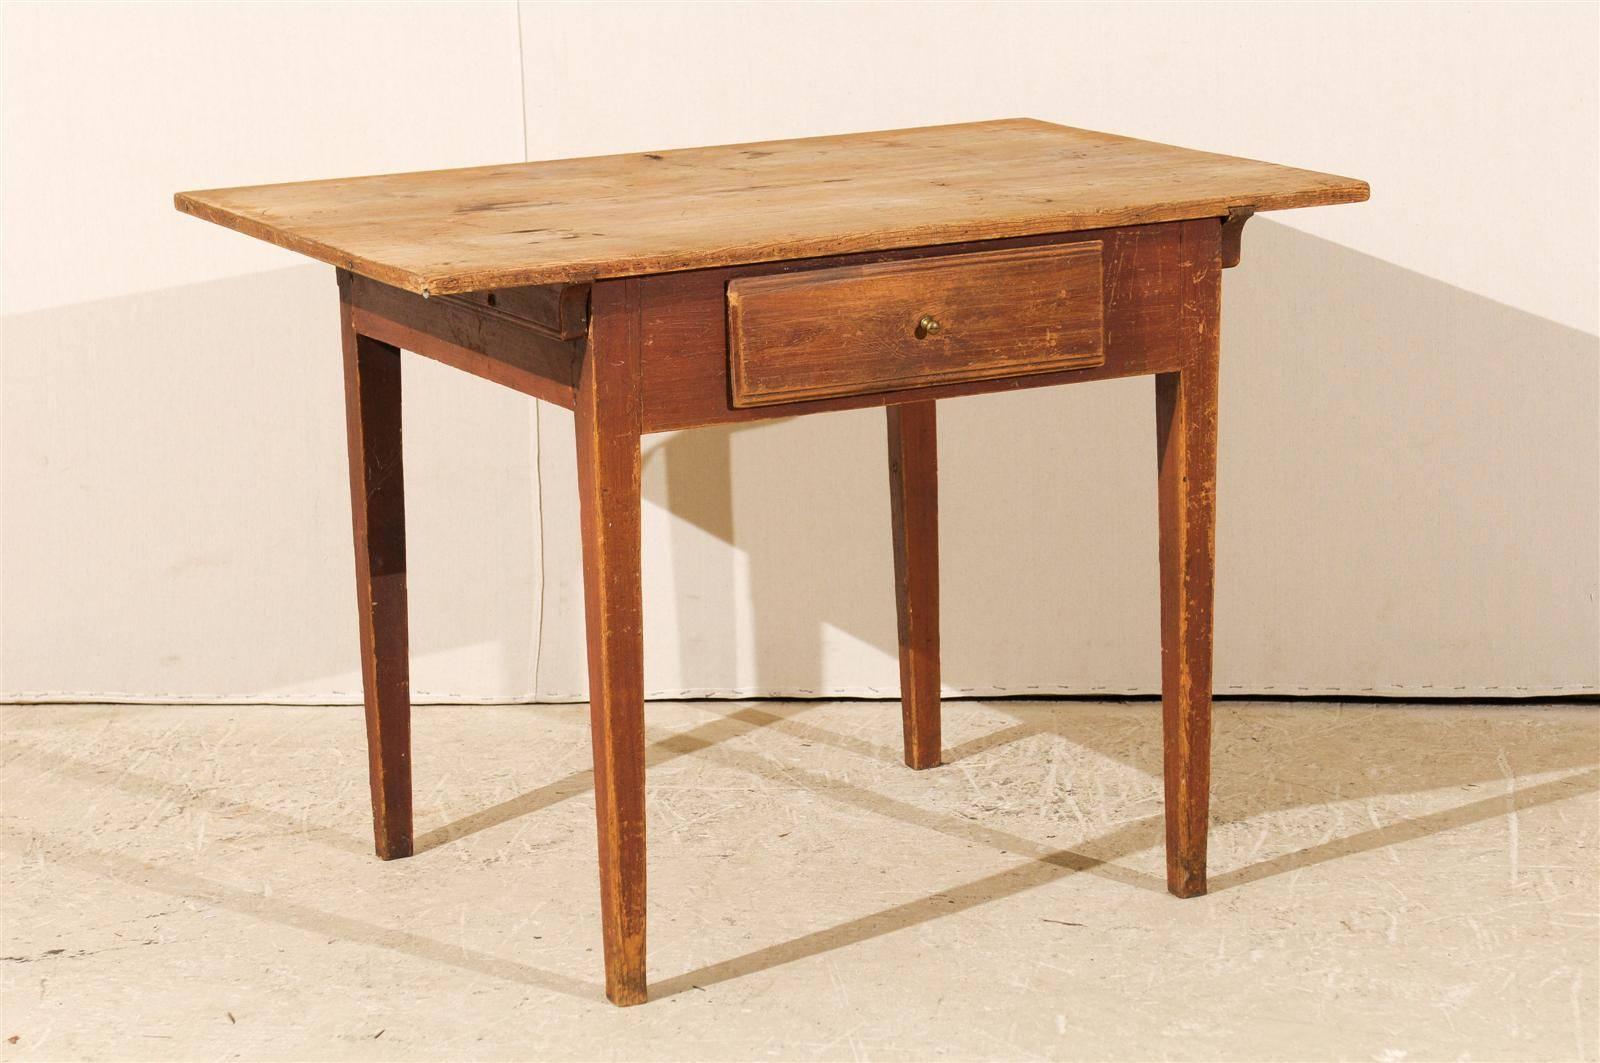 A Swedish mid-19th century single-drawer table. This side table features original finish with beautiful patina showing age. This table has a simple yet elegant structure, with legs that have a slight taper. This Swedish piece would work perfectly as